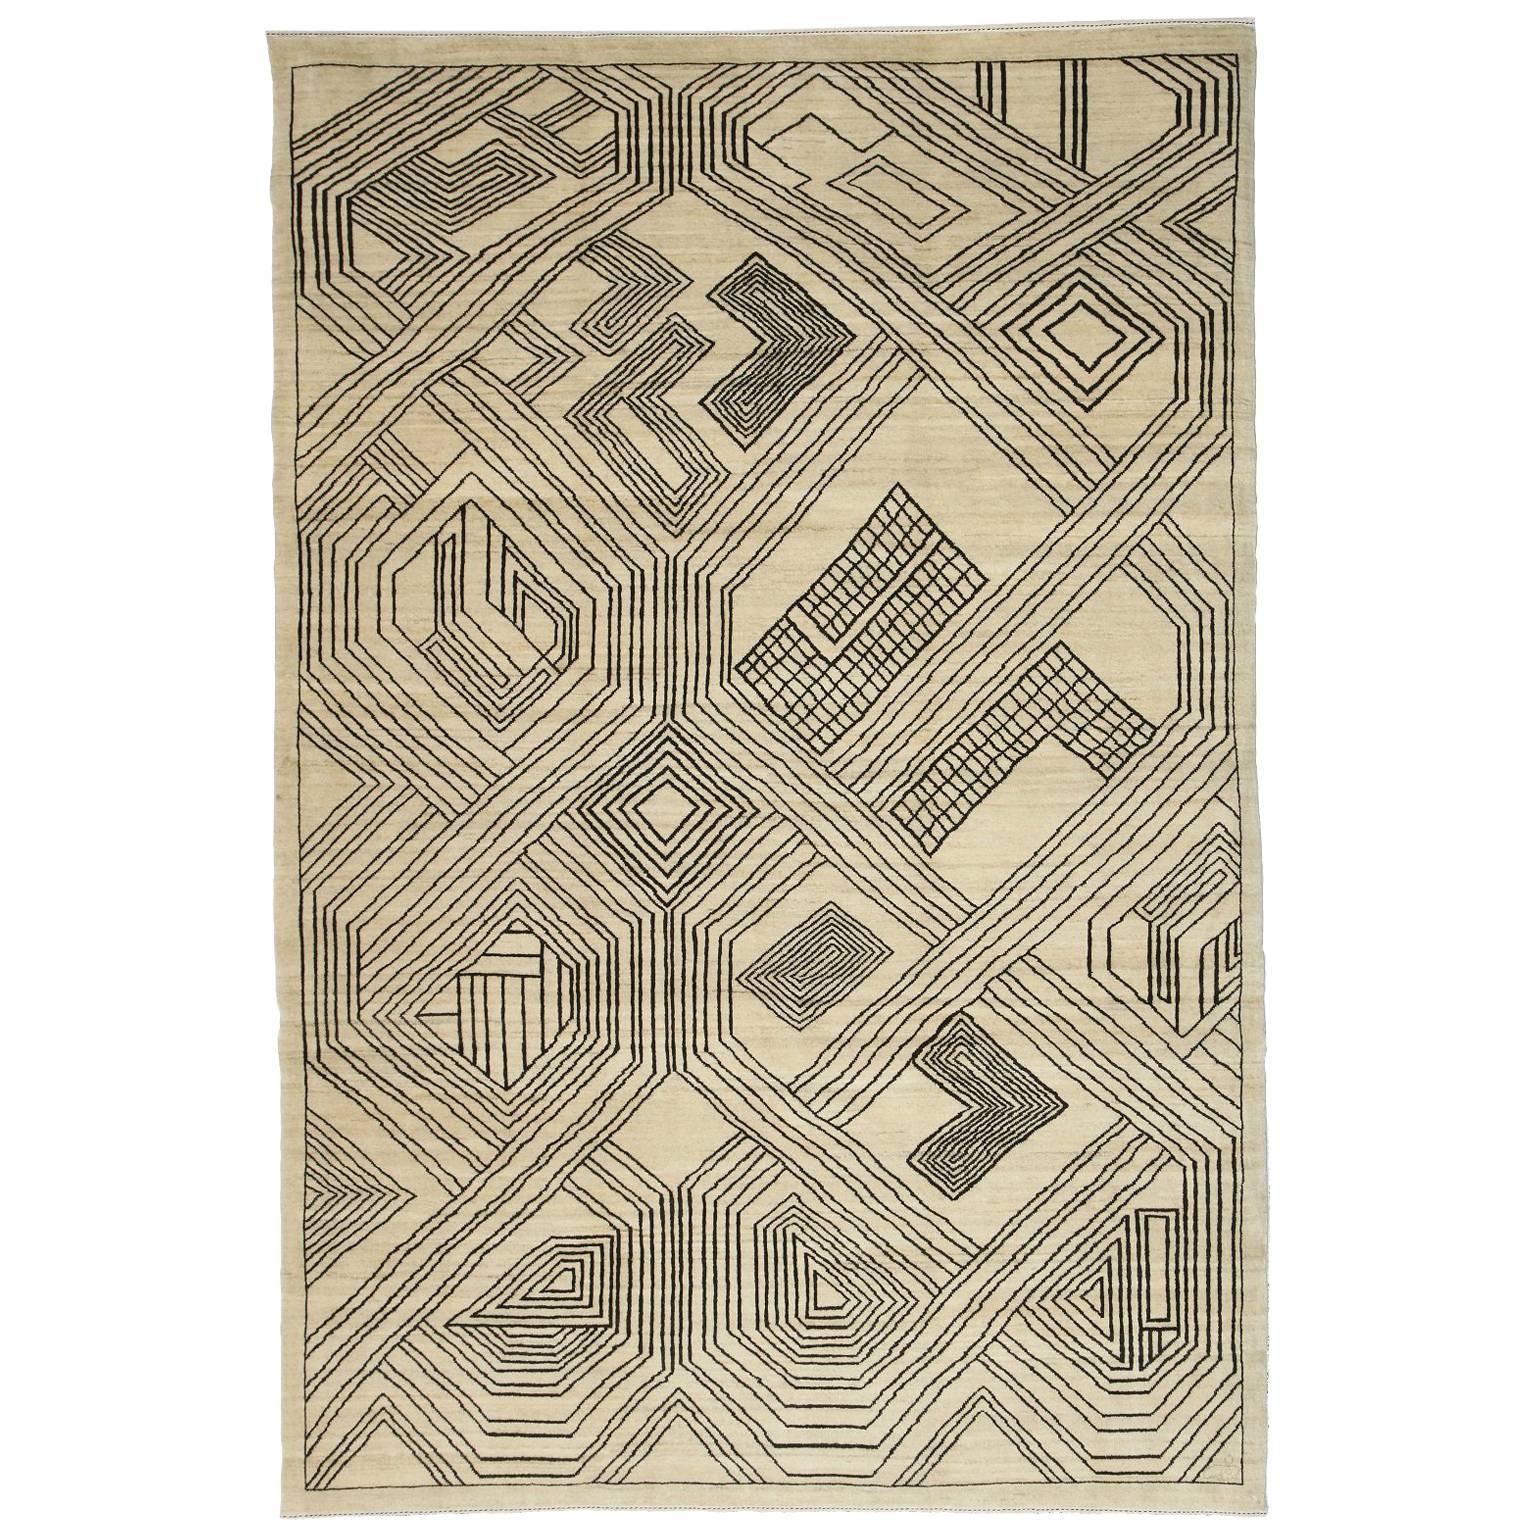 Orley Shabahang "Kuba" Contemporary Persian Rug, Neutral and Gray, 6' x 9' For Sale